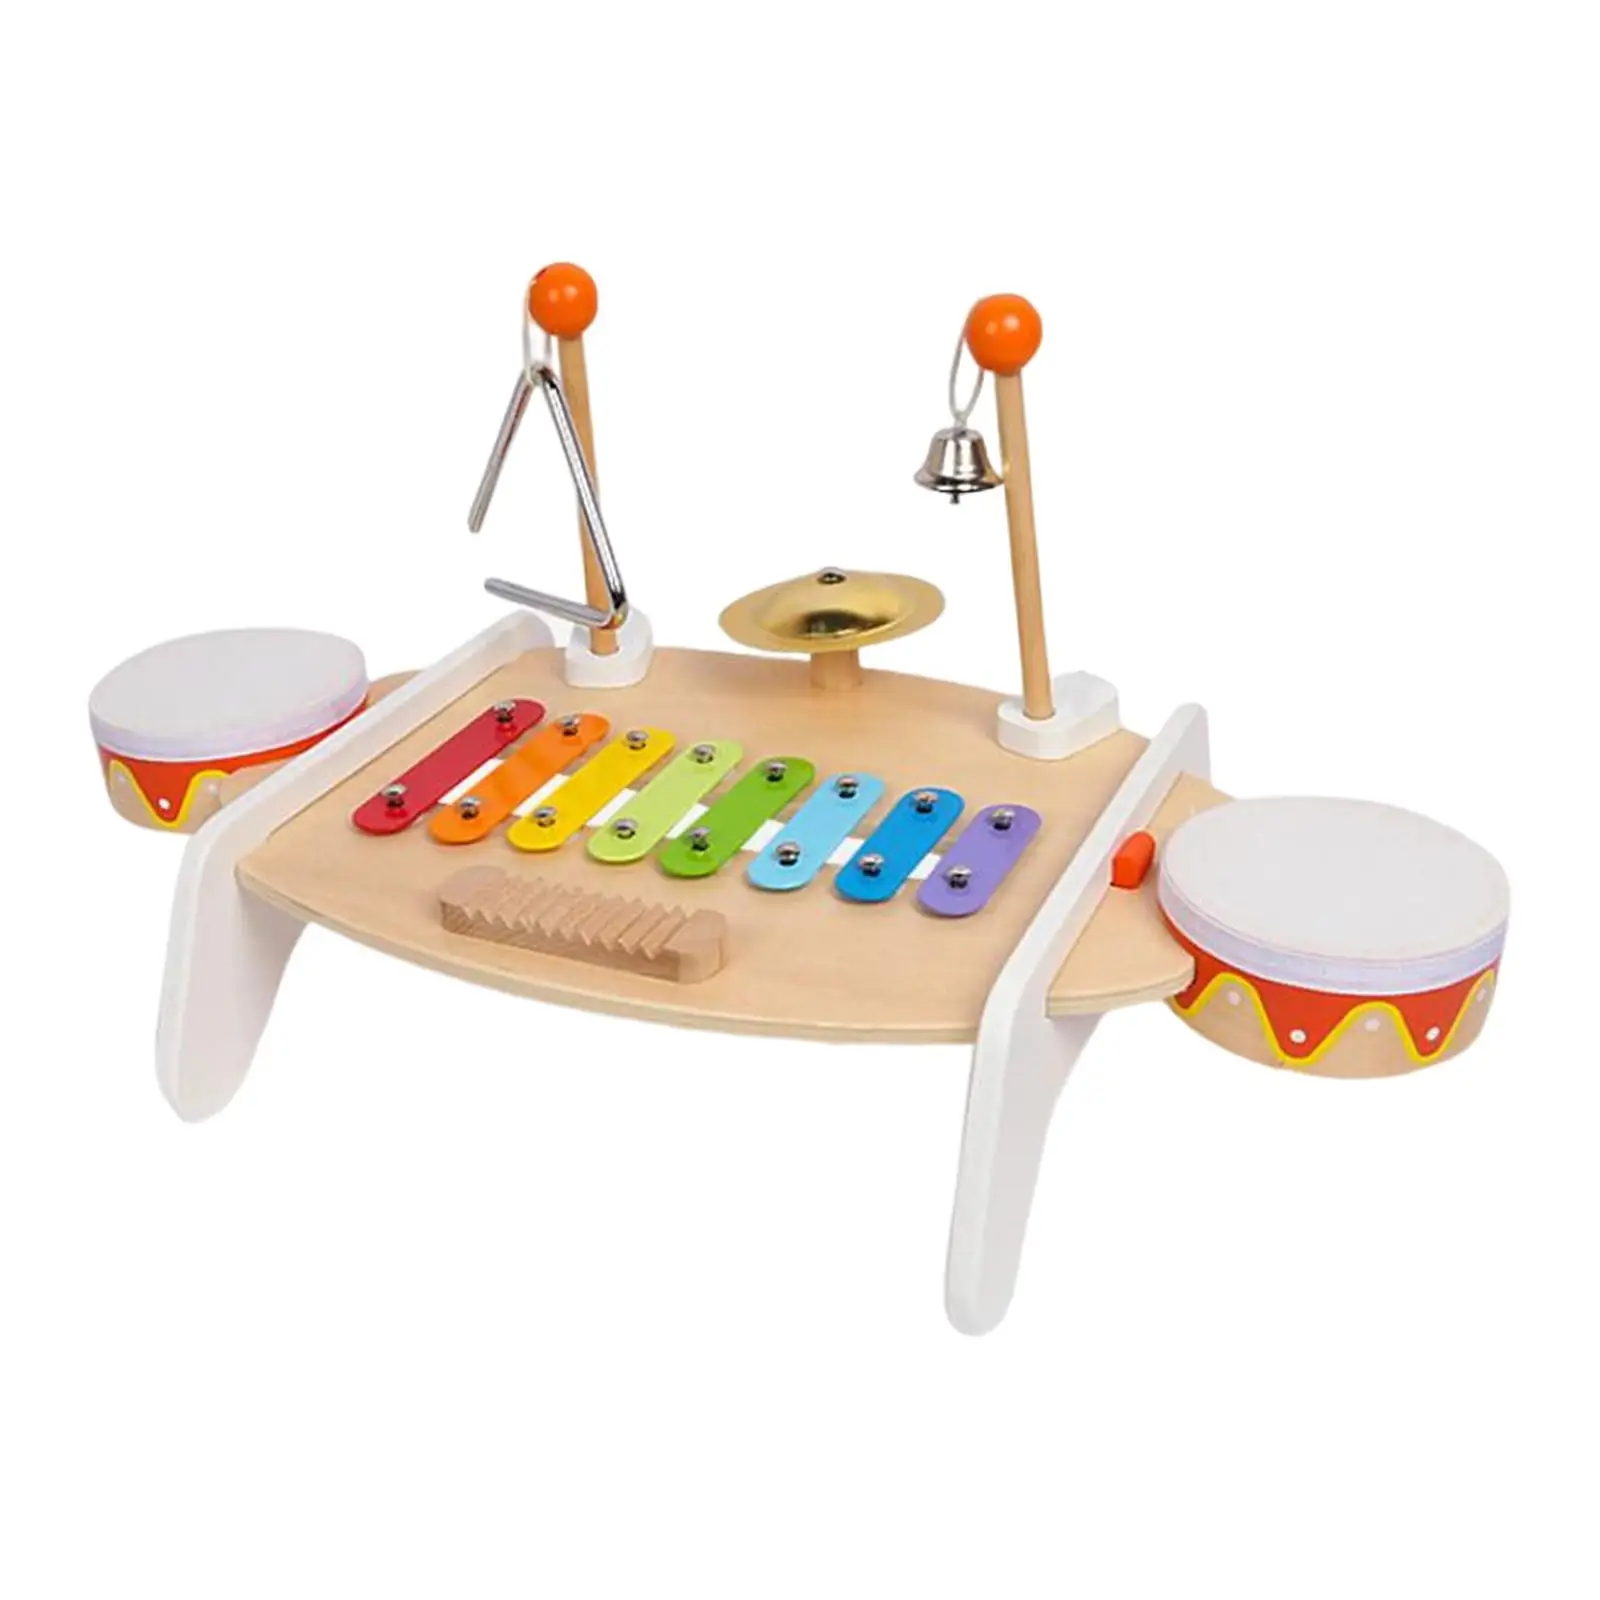 

Portable Xylophone Toy Wooden Percussion Toy Sensory Musical Toy Montessori Toy for Kids Children Girls Beginner Gift